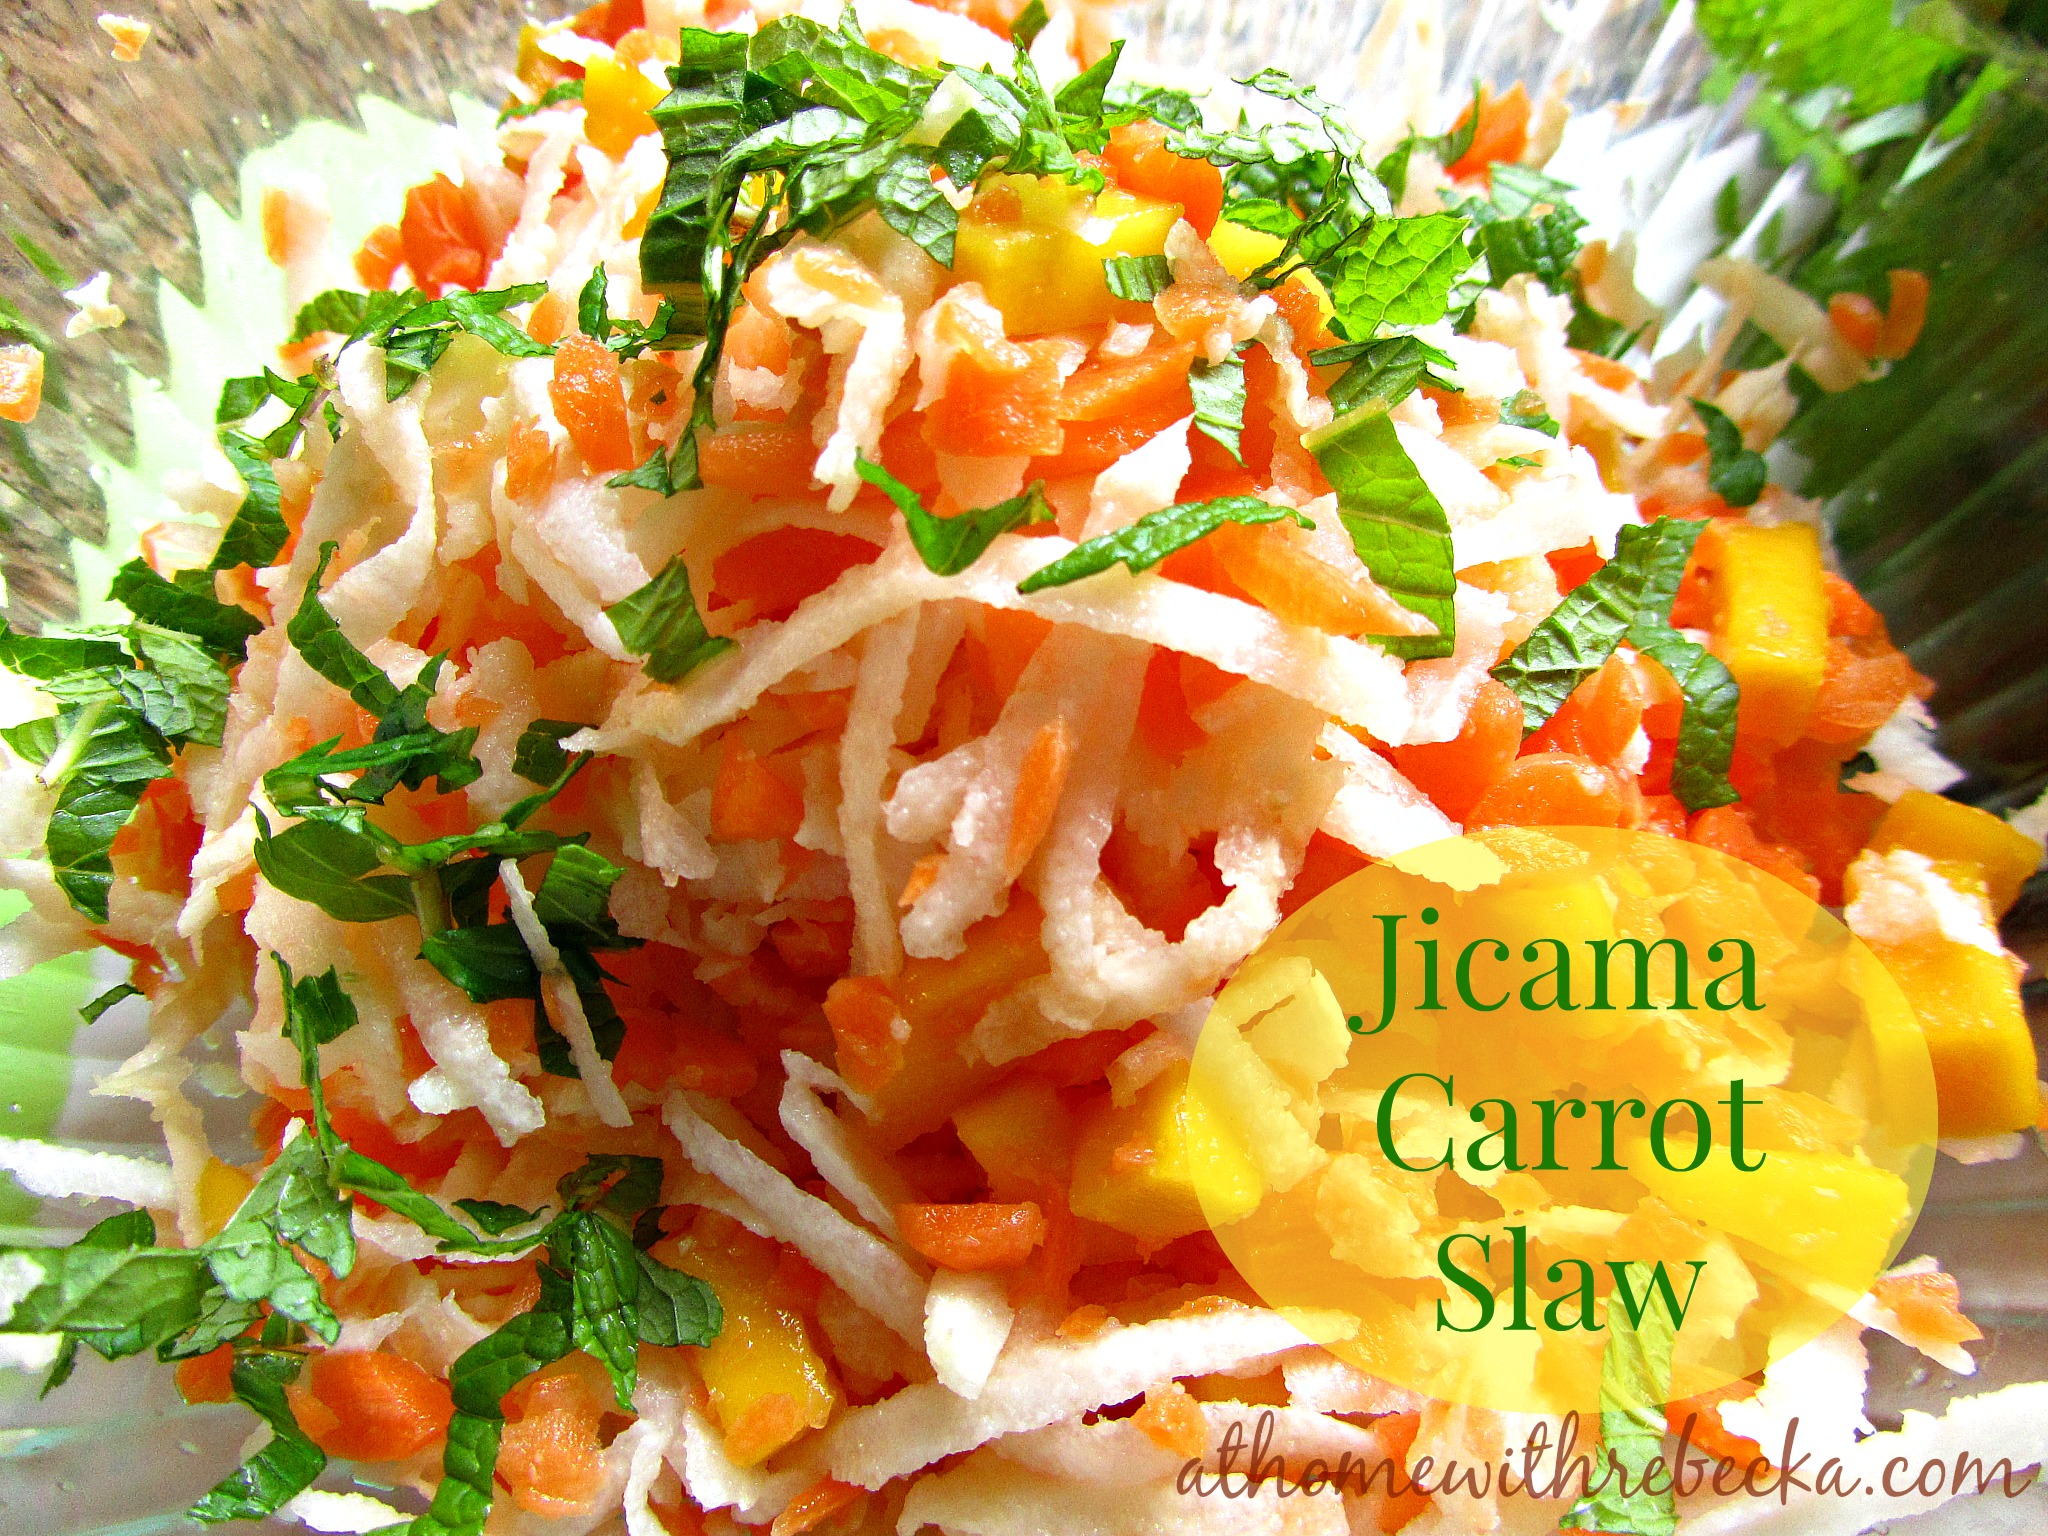 Jicama carrot and mango slaw is full of bright flavor and color! This delicious slaw recipe makes the perfect side dish, or add protein to make a complete meal.